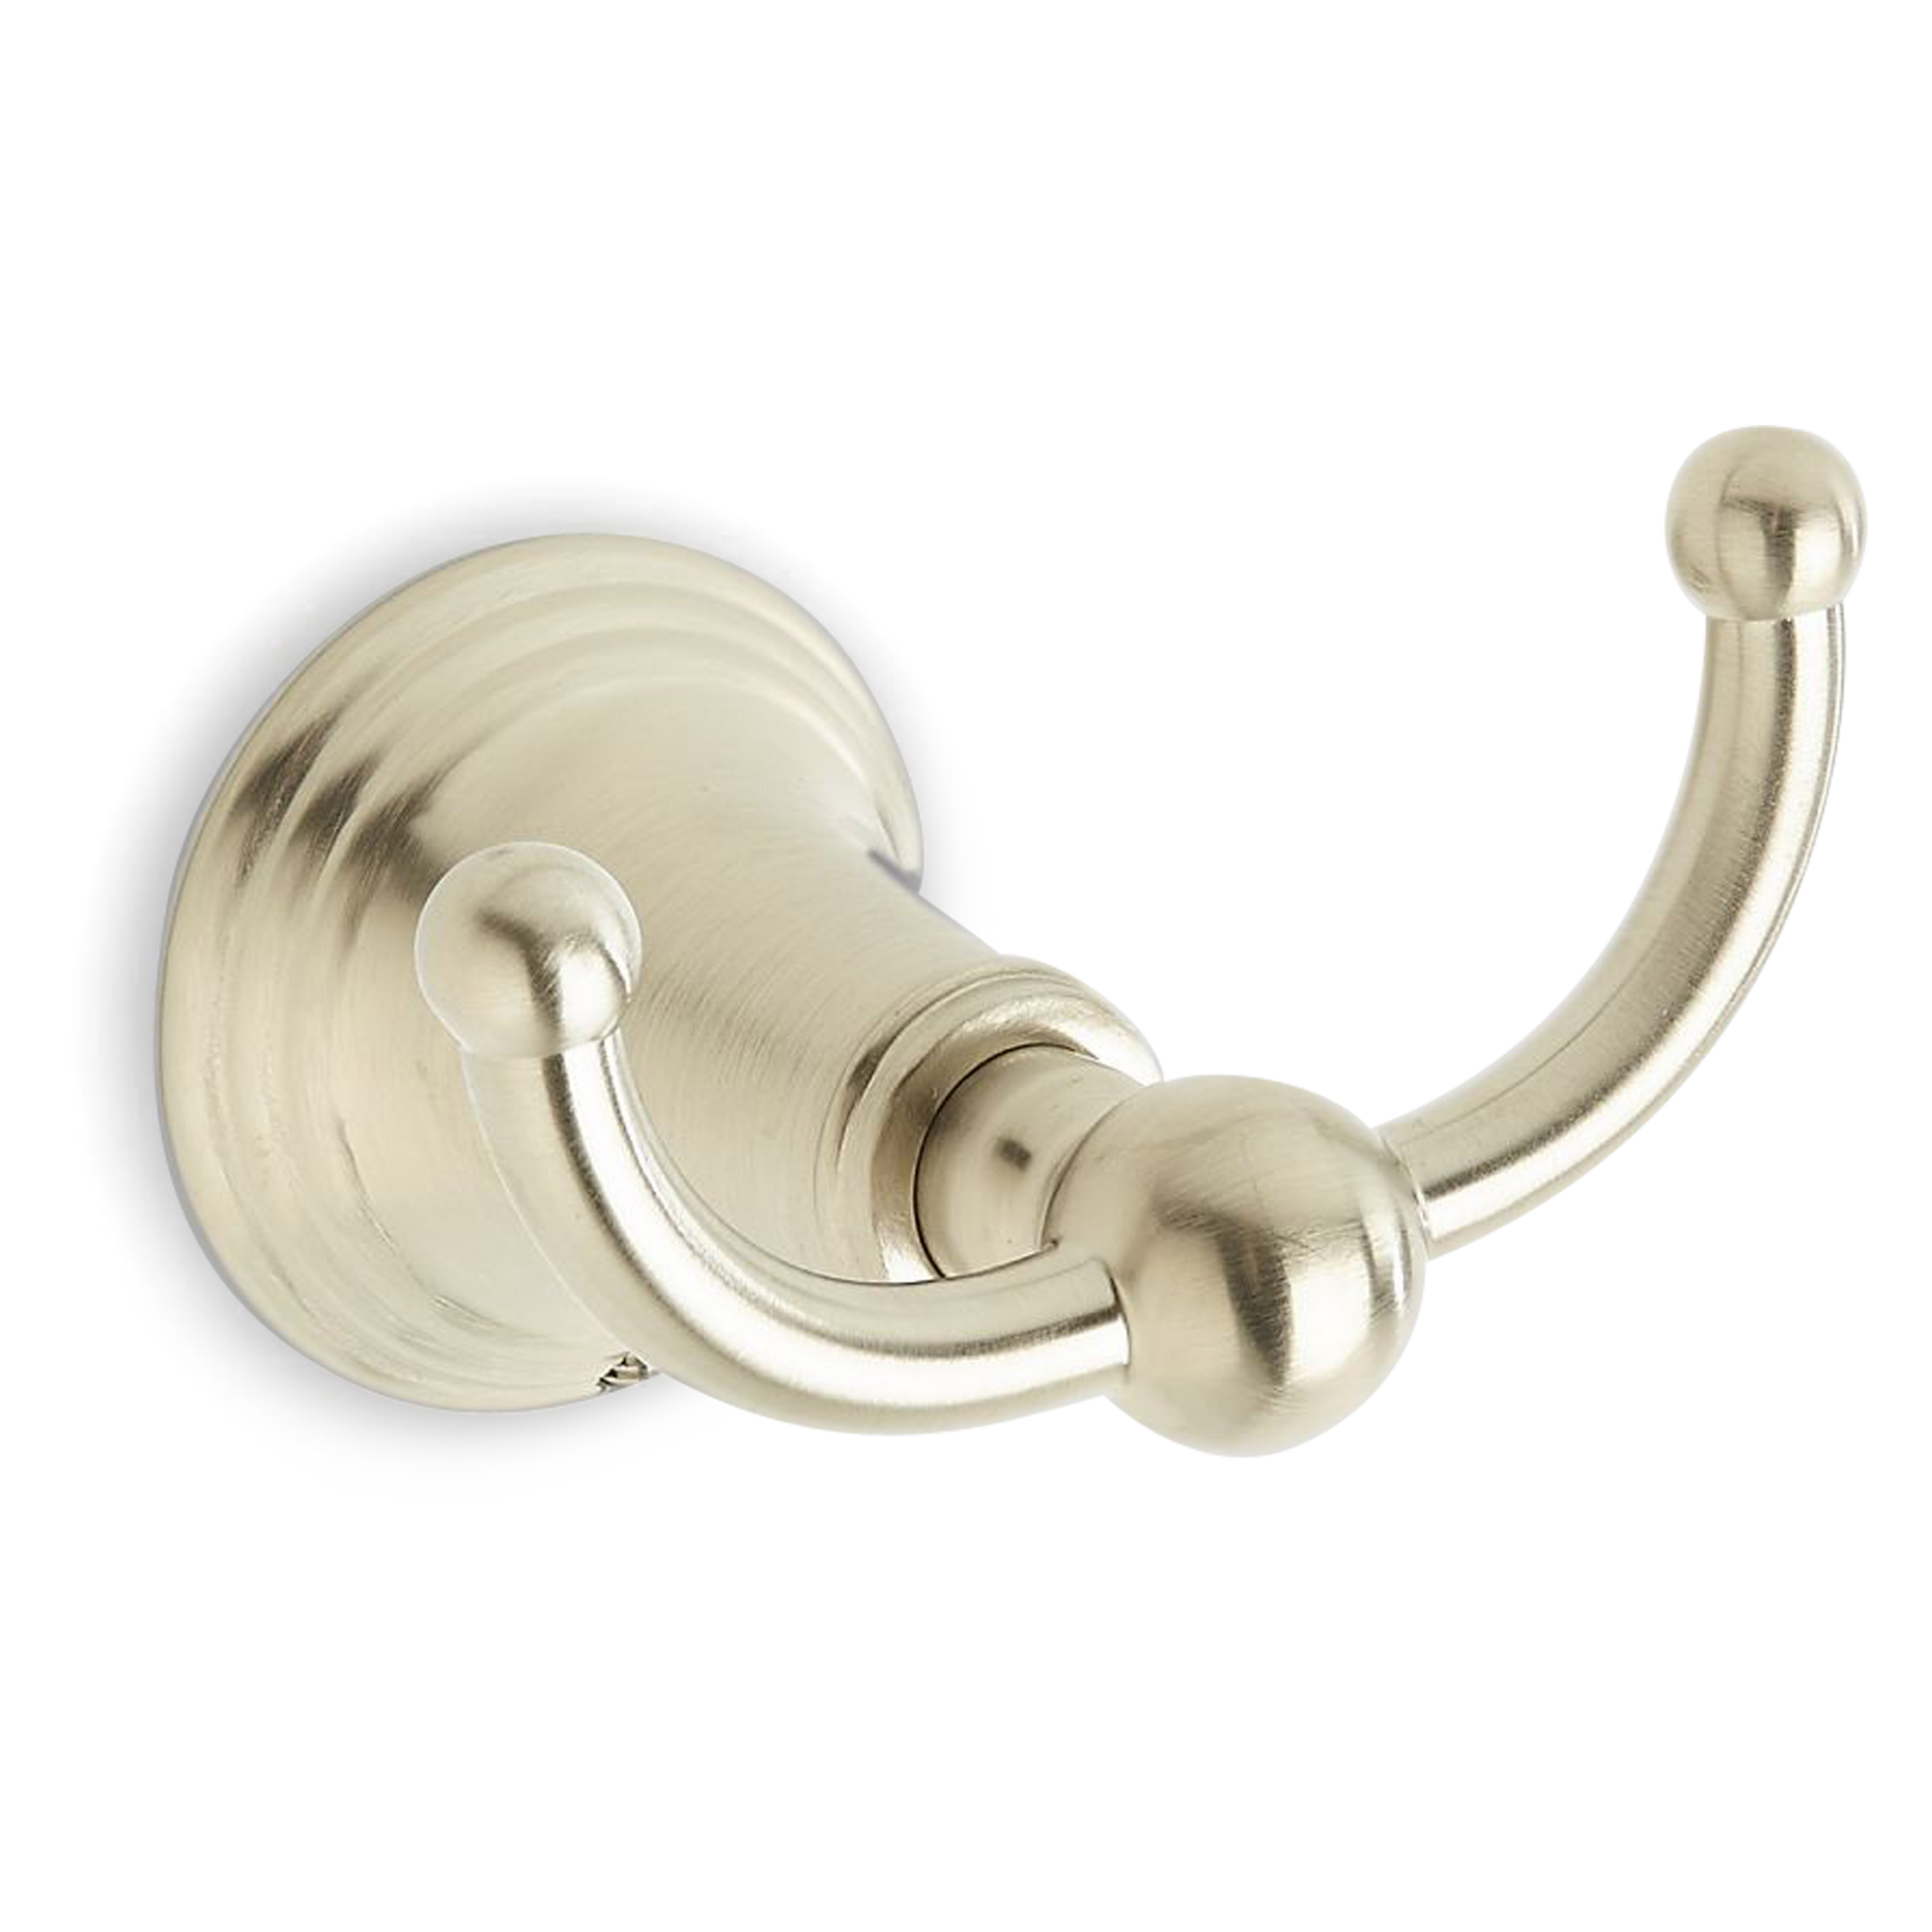 Finished in polished chrome and available in multiple finishes, our Madille double robe hook, features an elegant ridged pattern at its base.